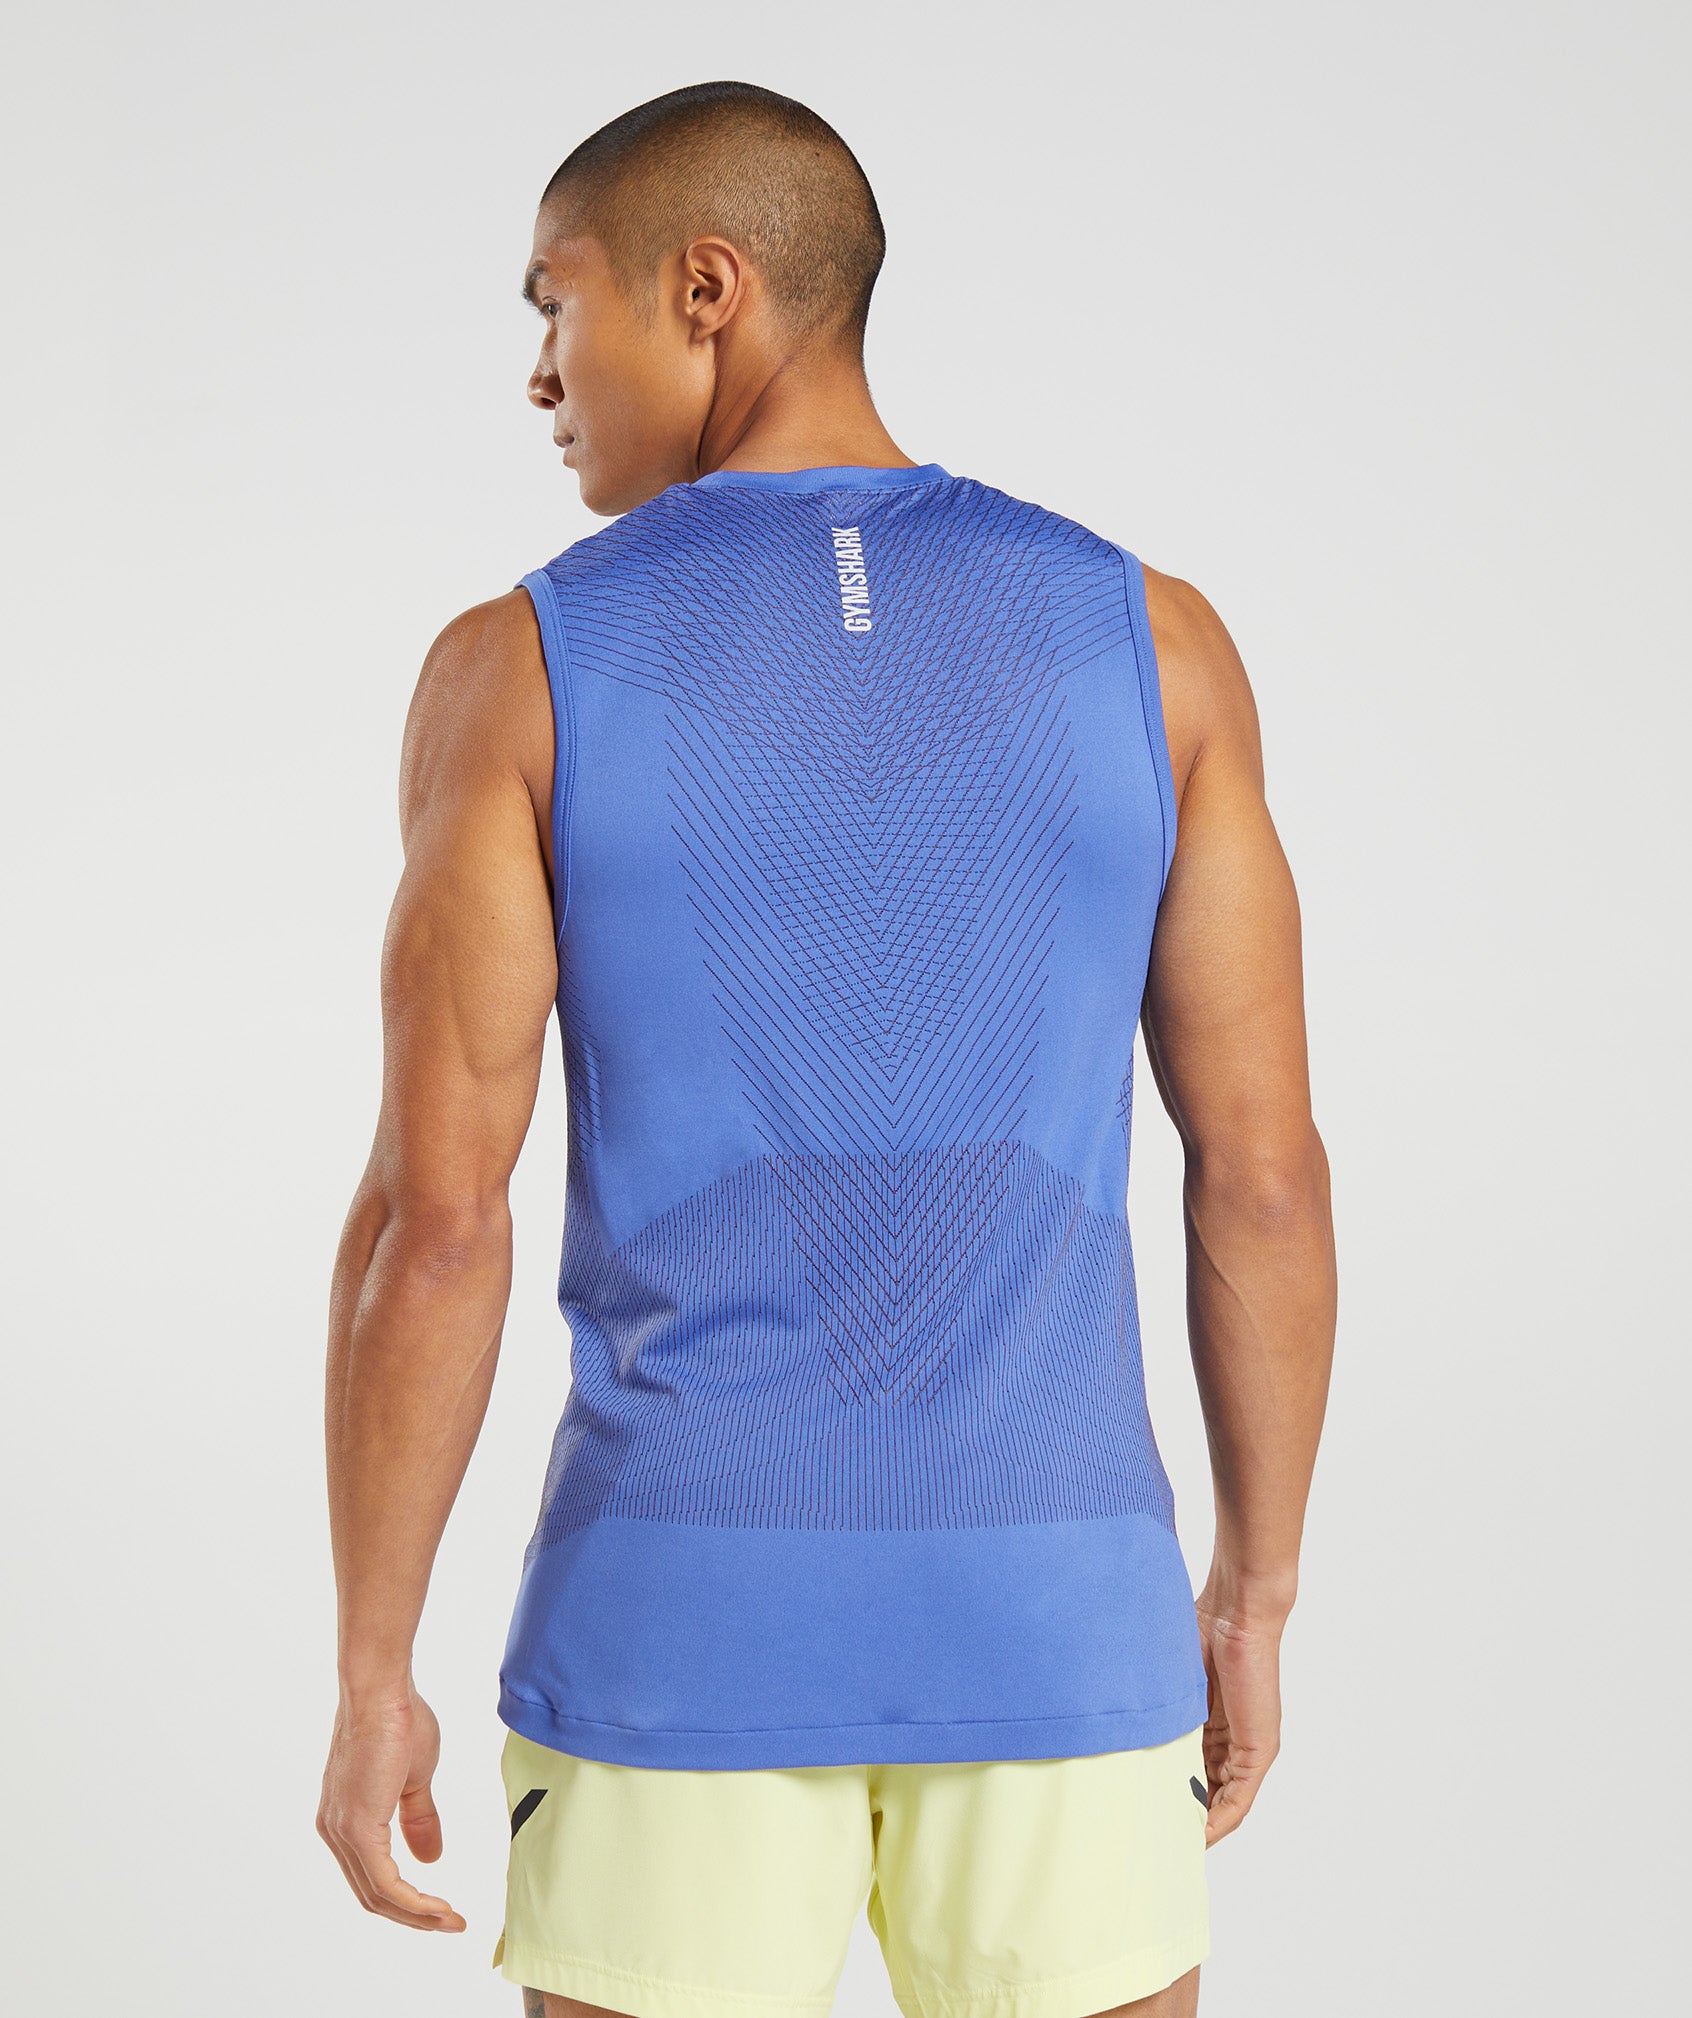 Apex Seamless Tank in Court Blue/Onyx Grey - view 2